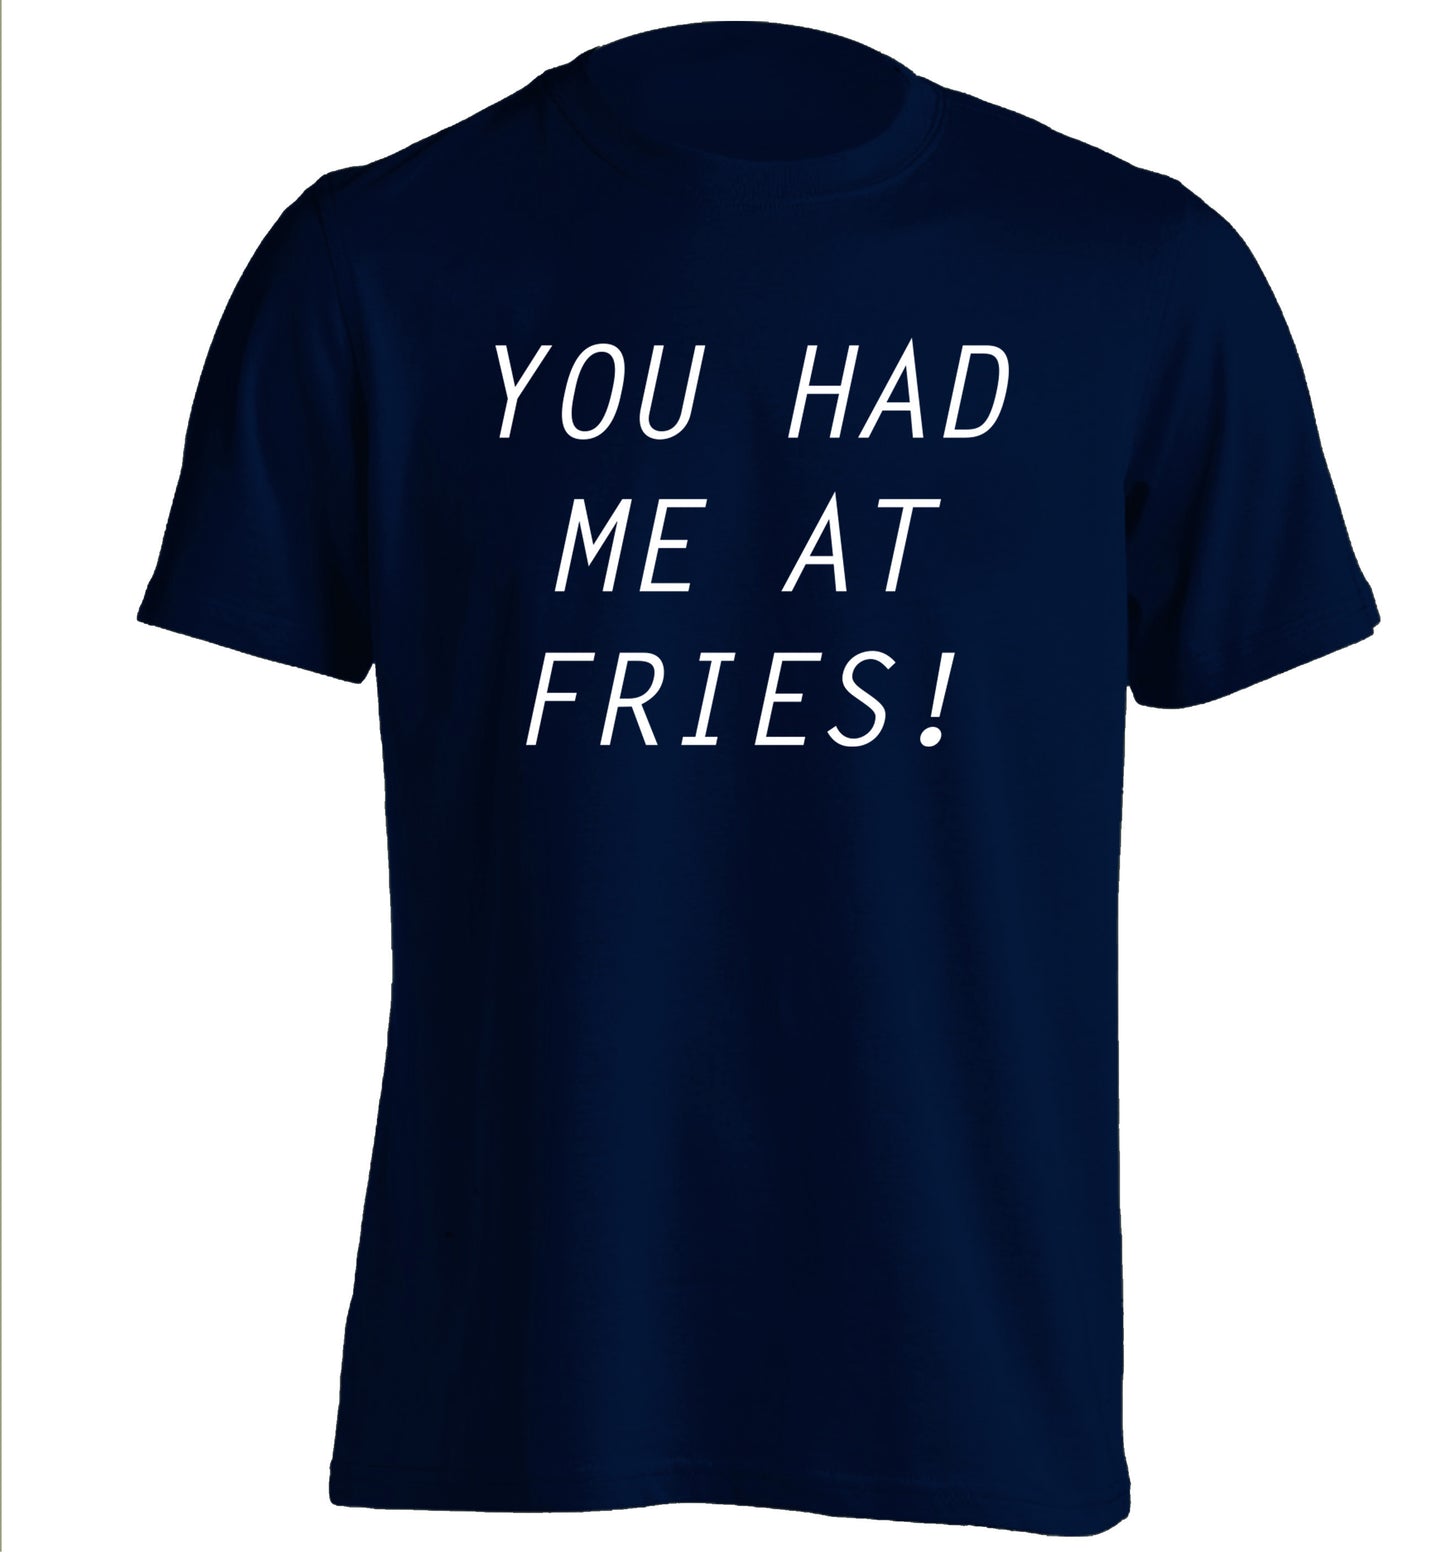 You had me at fries adults unisex navy Tshirt 2XL